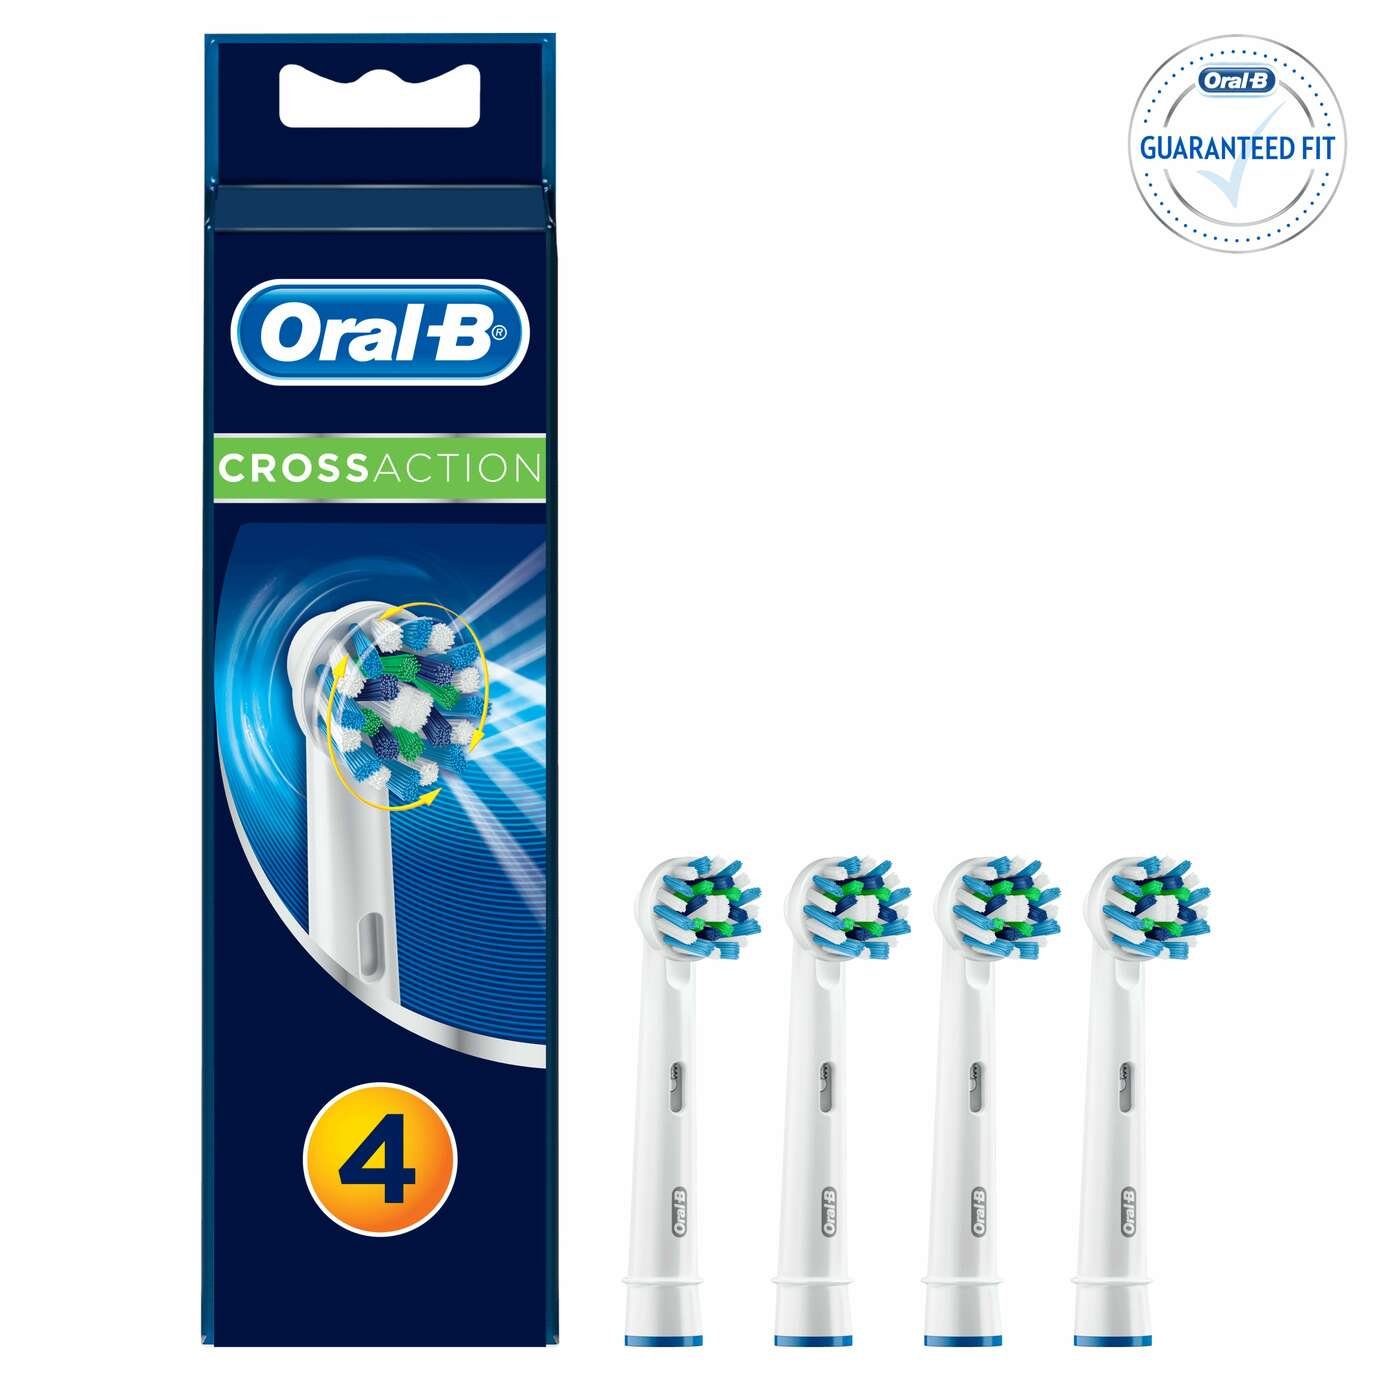 Oral-B CrossAction Electric Toothbrush Heads - 4 Pack